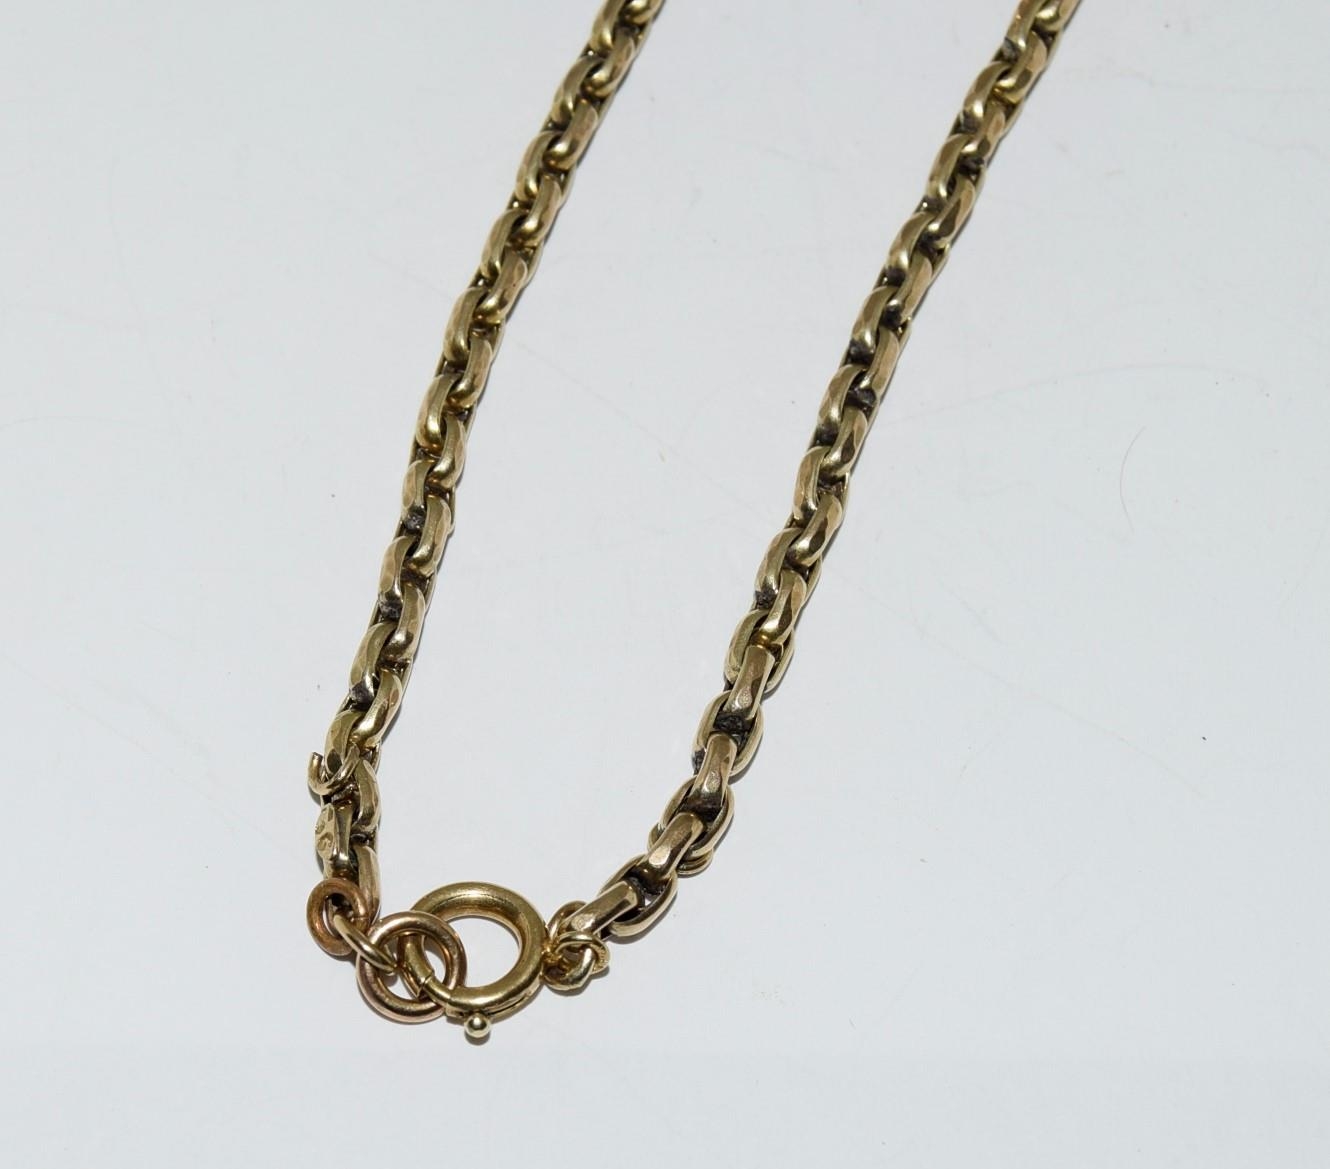 9ct gold ladies guard chain 145cm long 31.5gm - Image 3 of 4